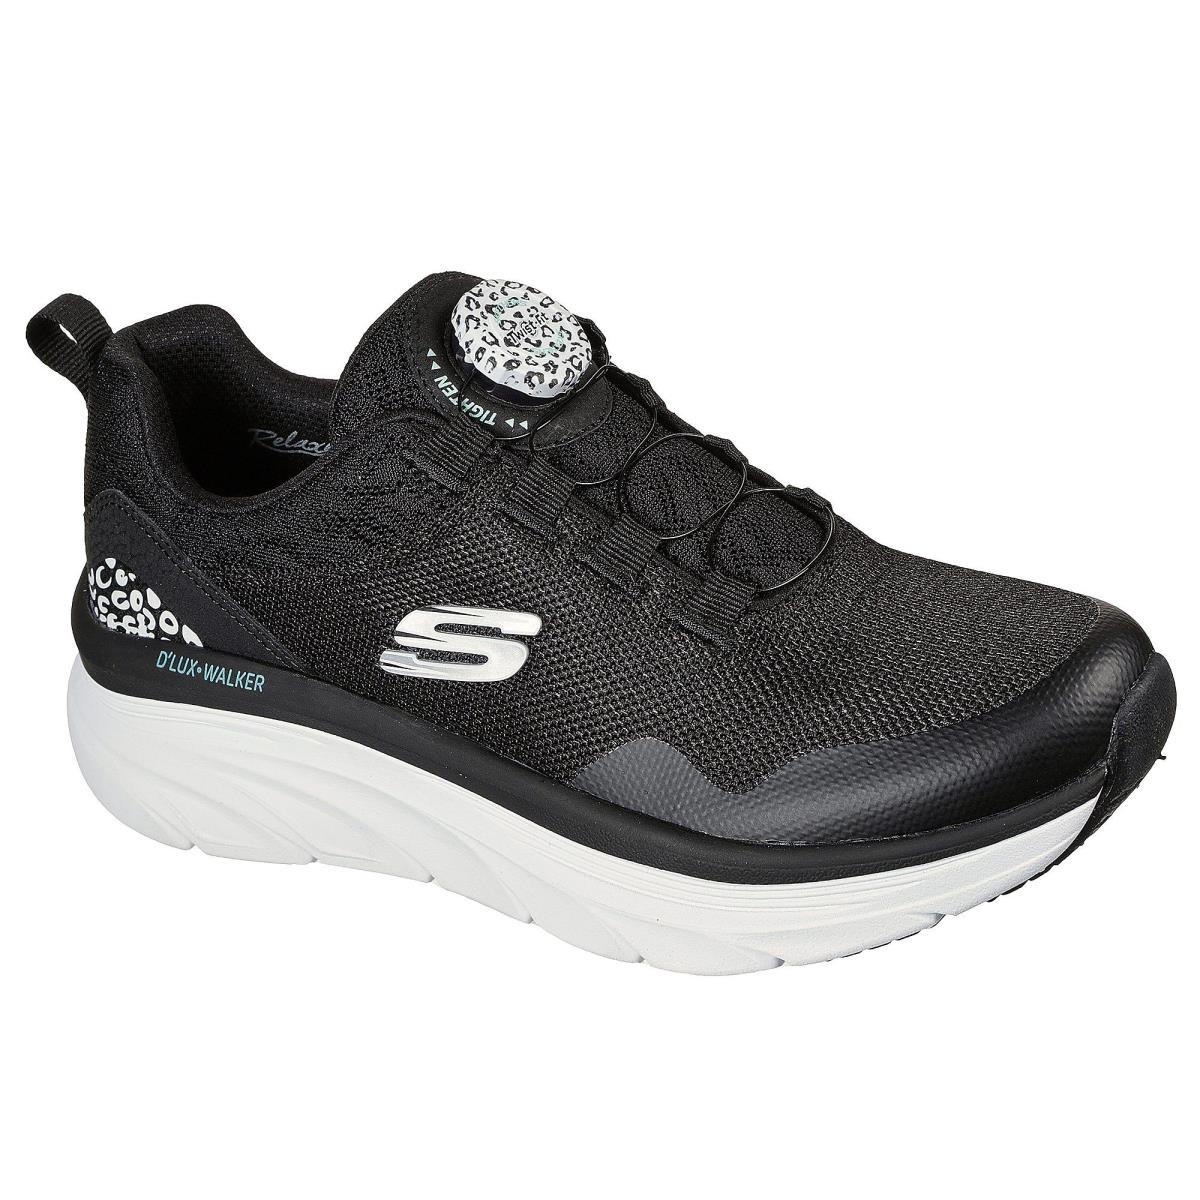 Skechers Womens D`lux Walker Player Athletic Shoes Black/White